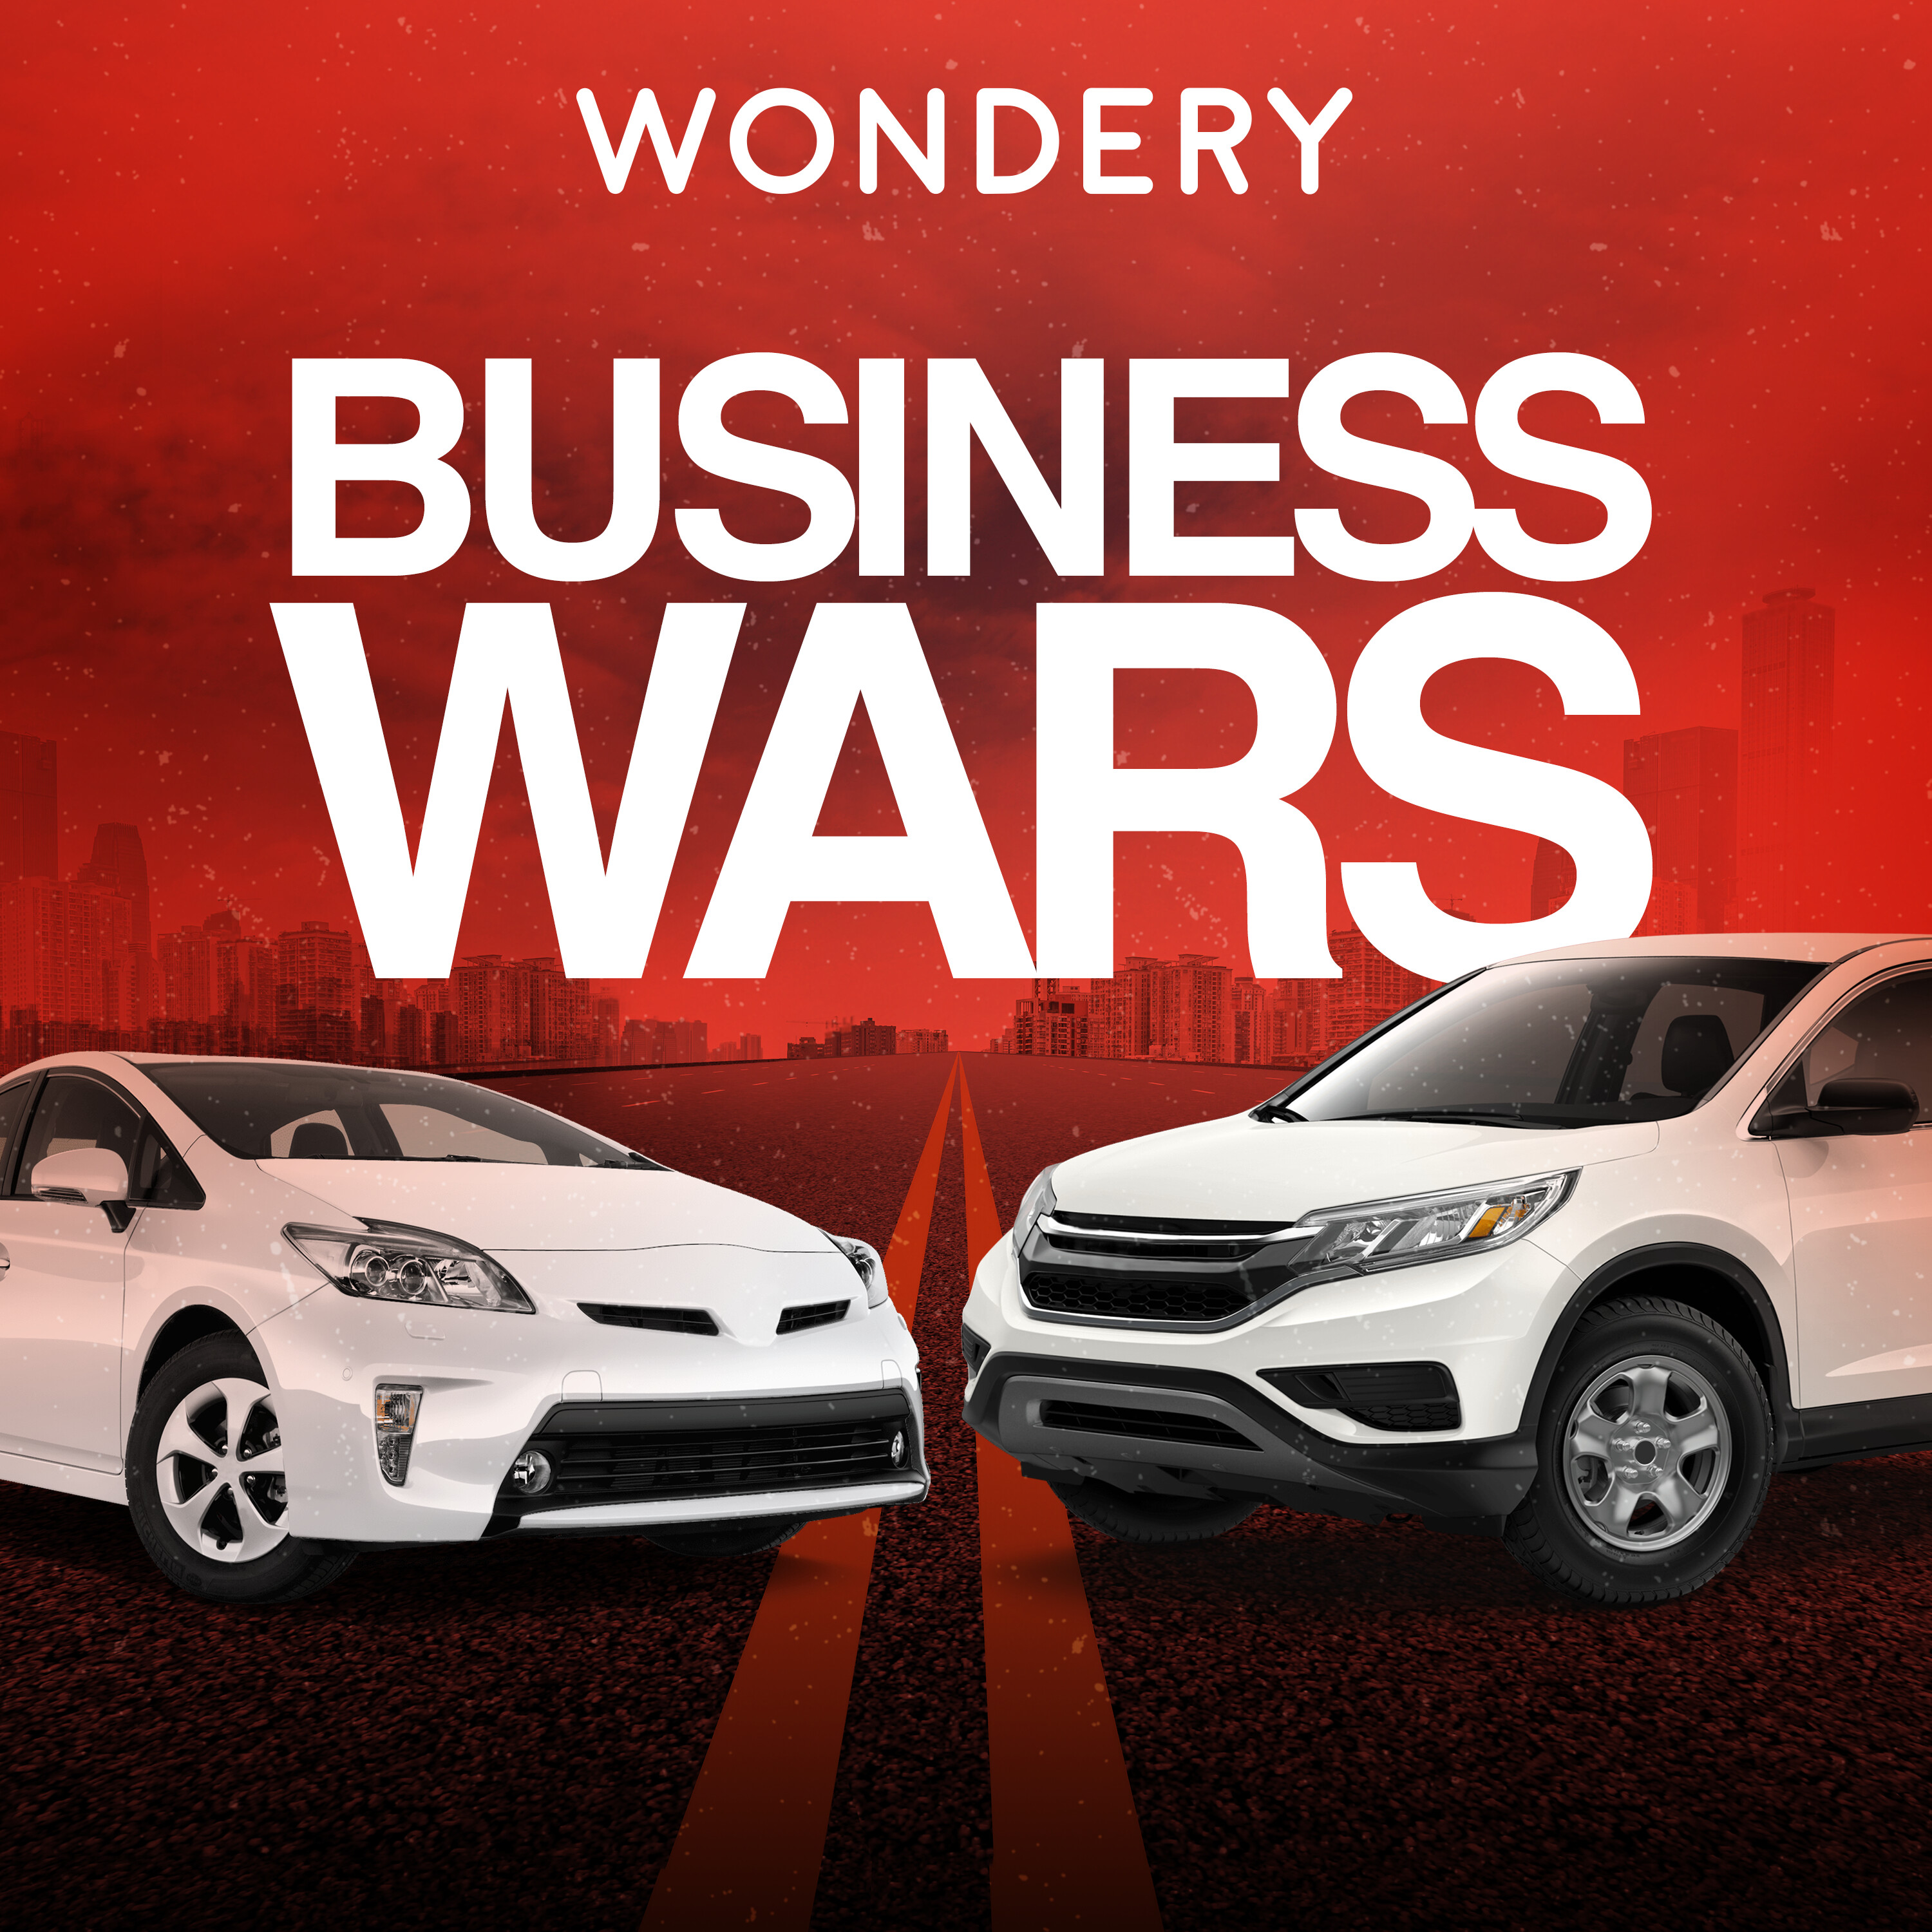 Business Wars podcast